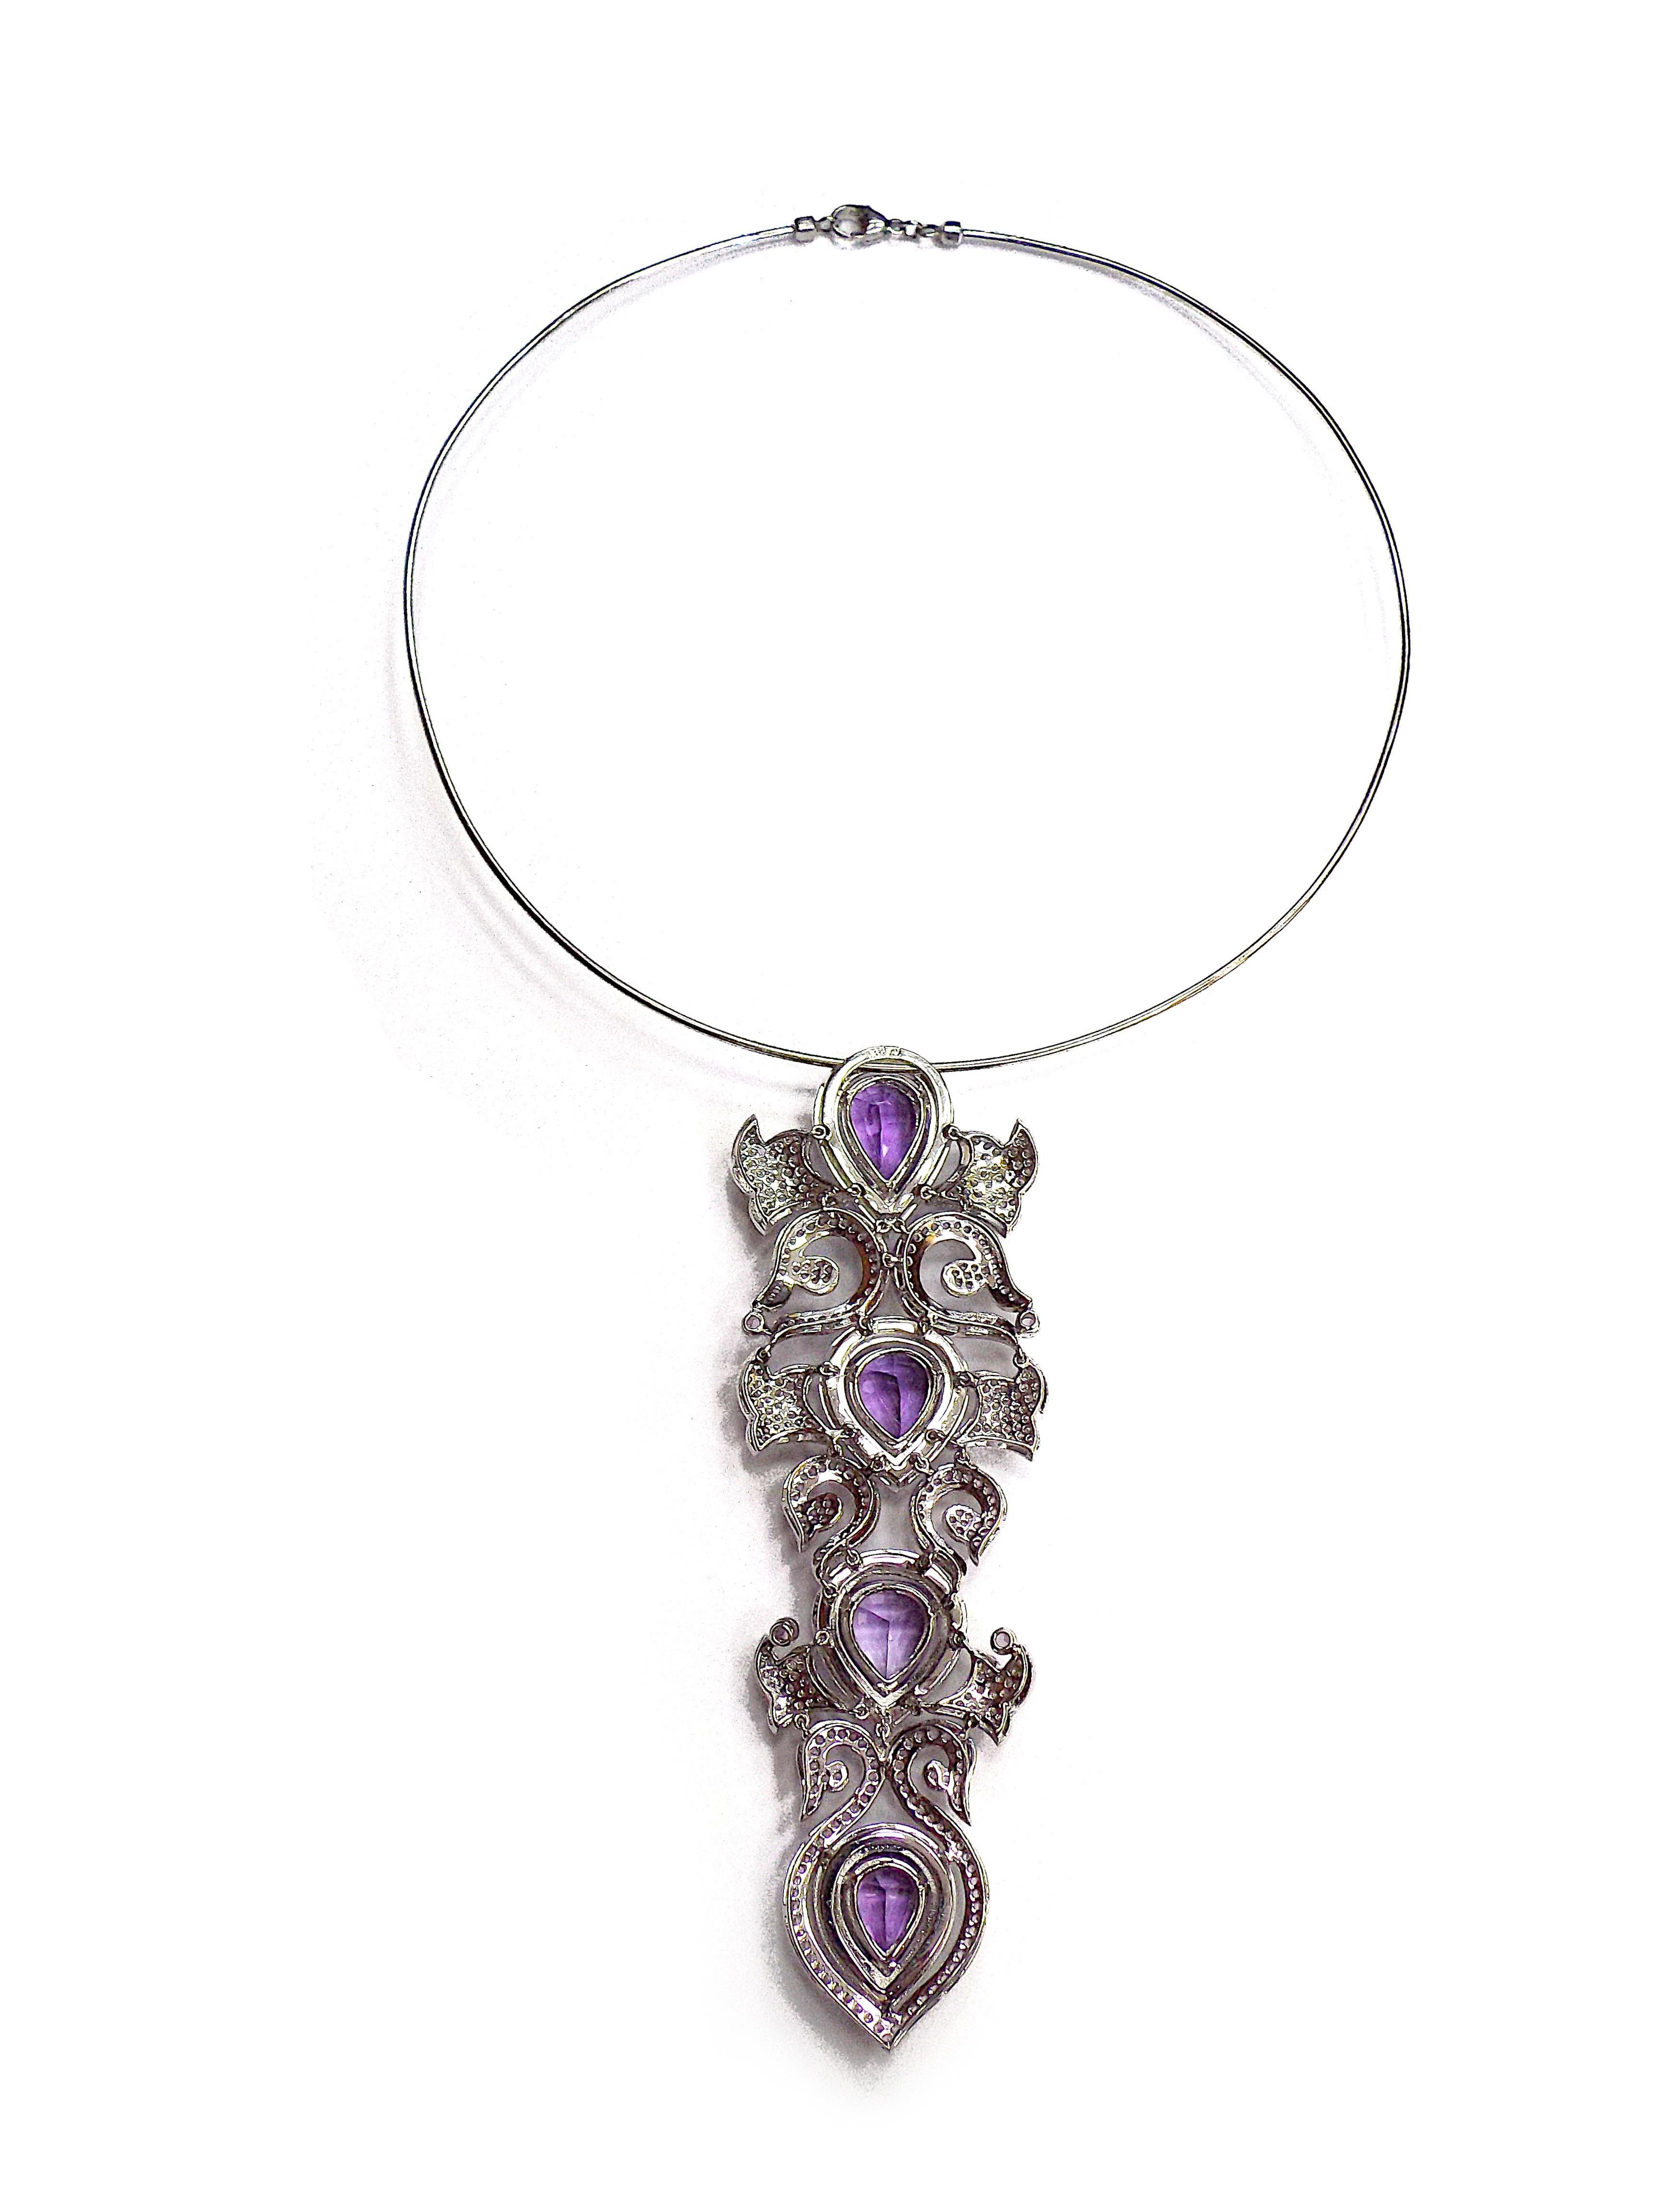 Consisting of a wire collar necklace suspending a motif pendant containing four pear shape mixed cut amethyst, numerous round mixed cut pink sapphires measuring 1.15-2.65 mm in diameter and numerous round brilliant cut diamonds weighing 8.00 carats